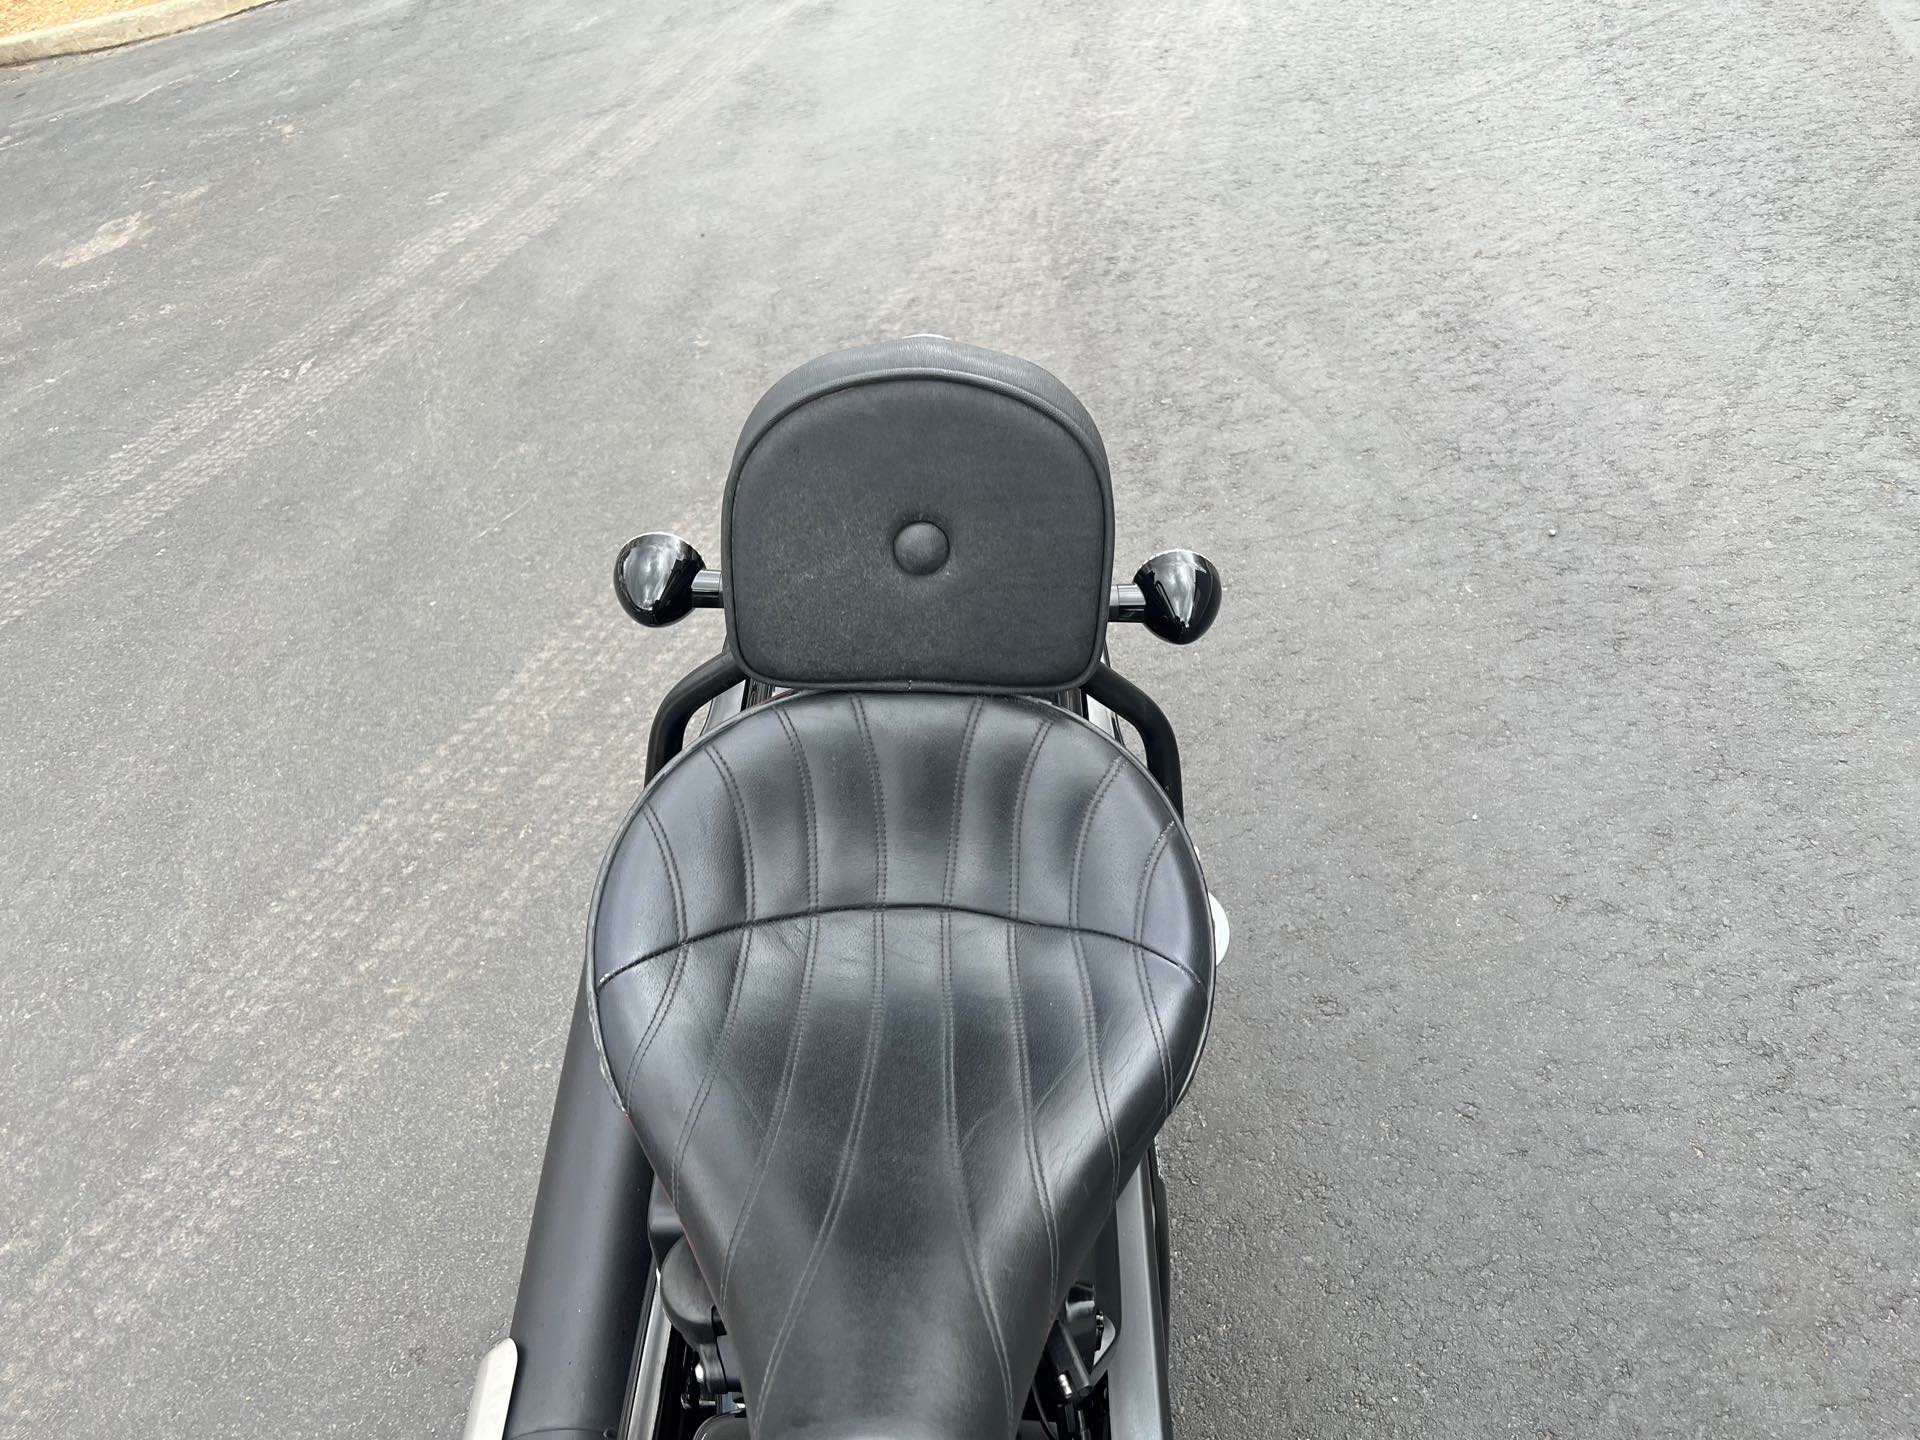 2014 Yamaha Bolt Base at Aces Motorcycles - Fort Collins